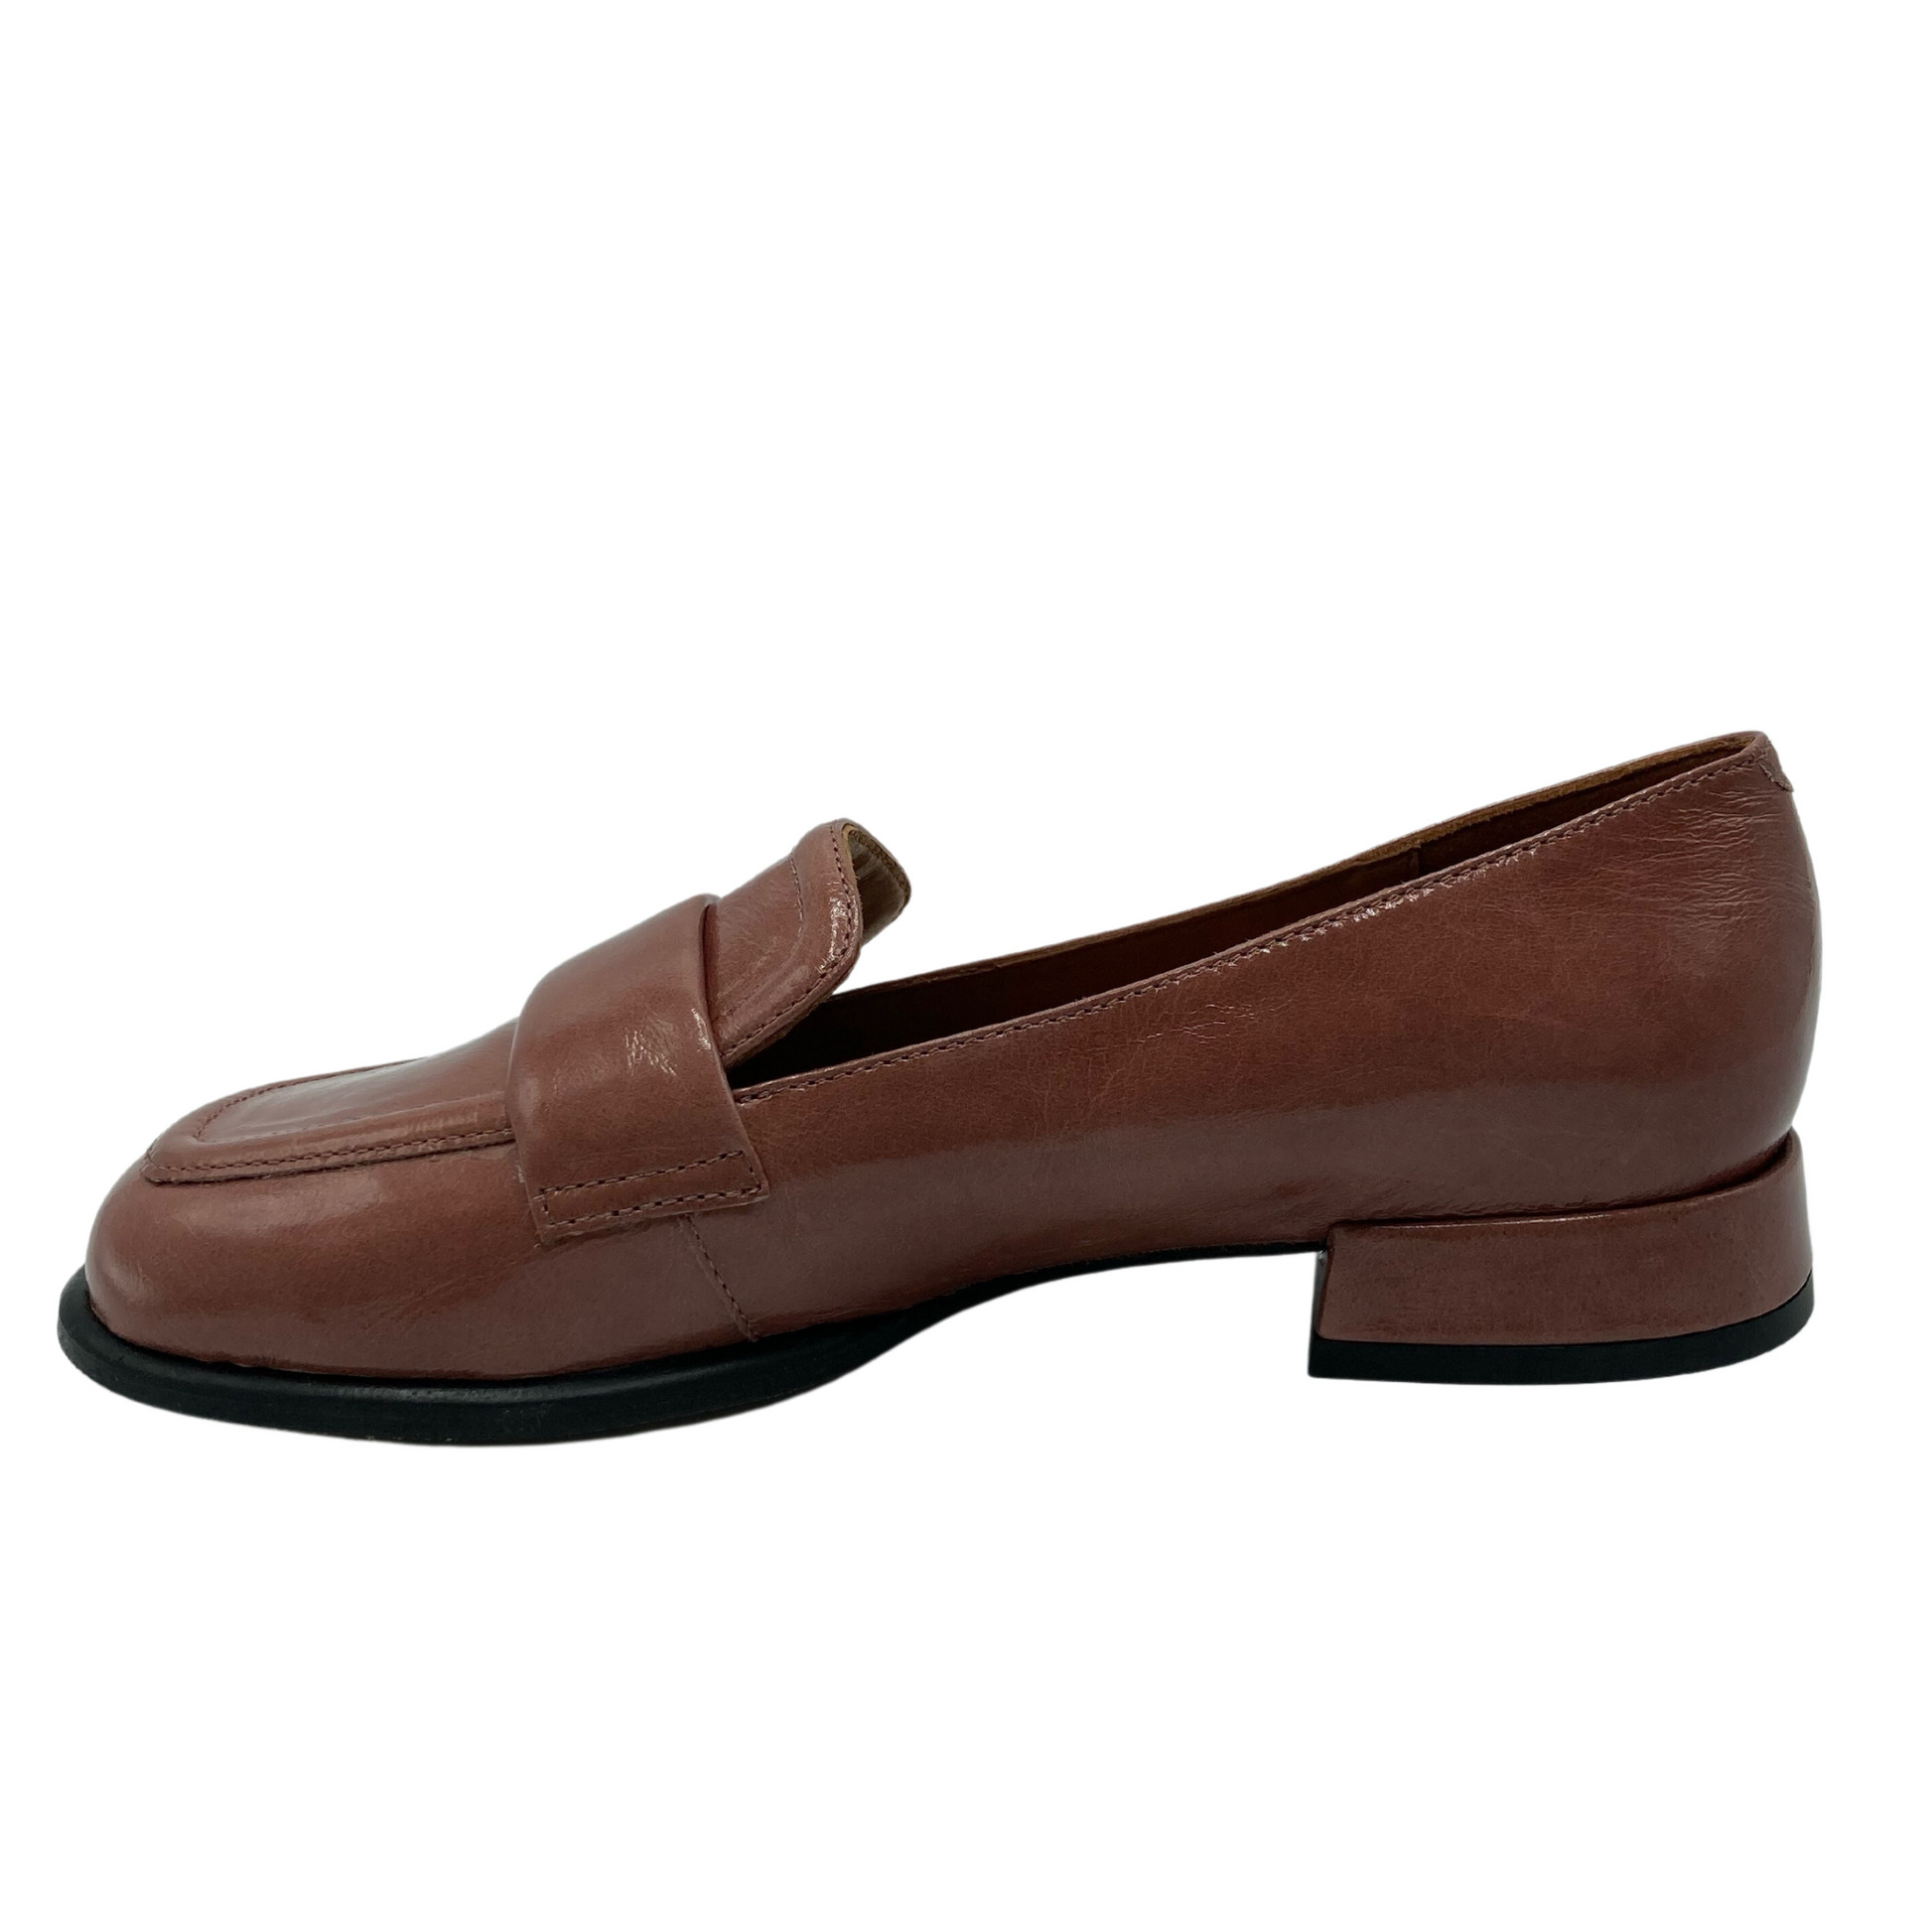 Left facing view of brown patent leather with low heel